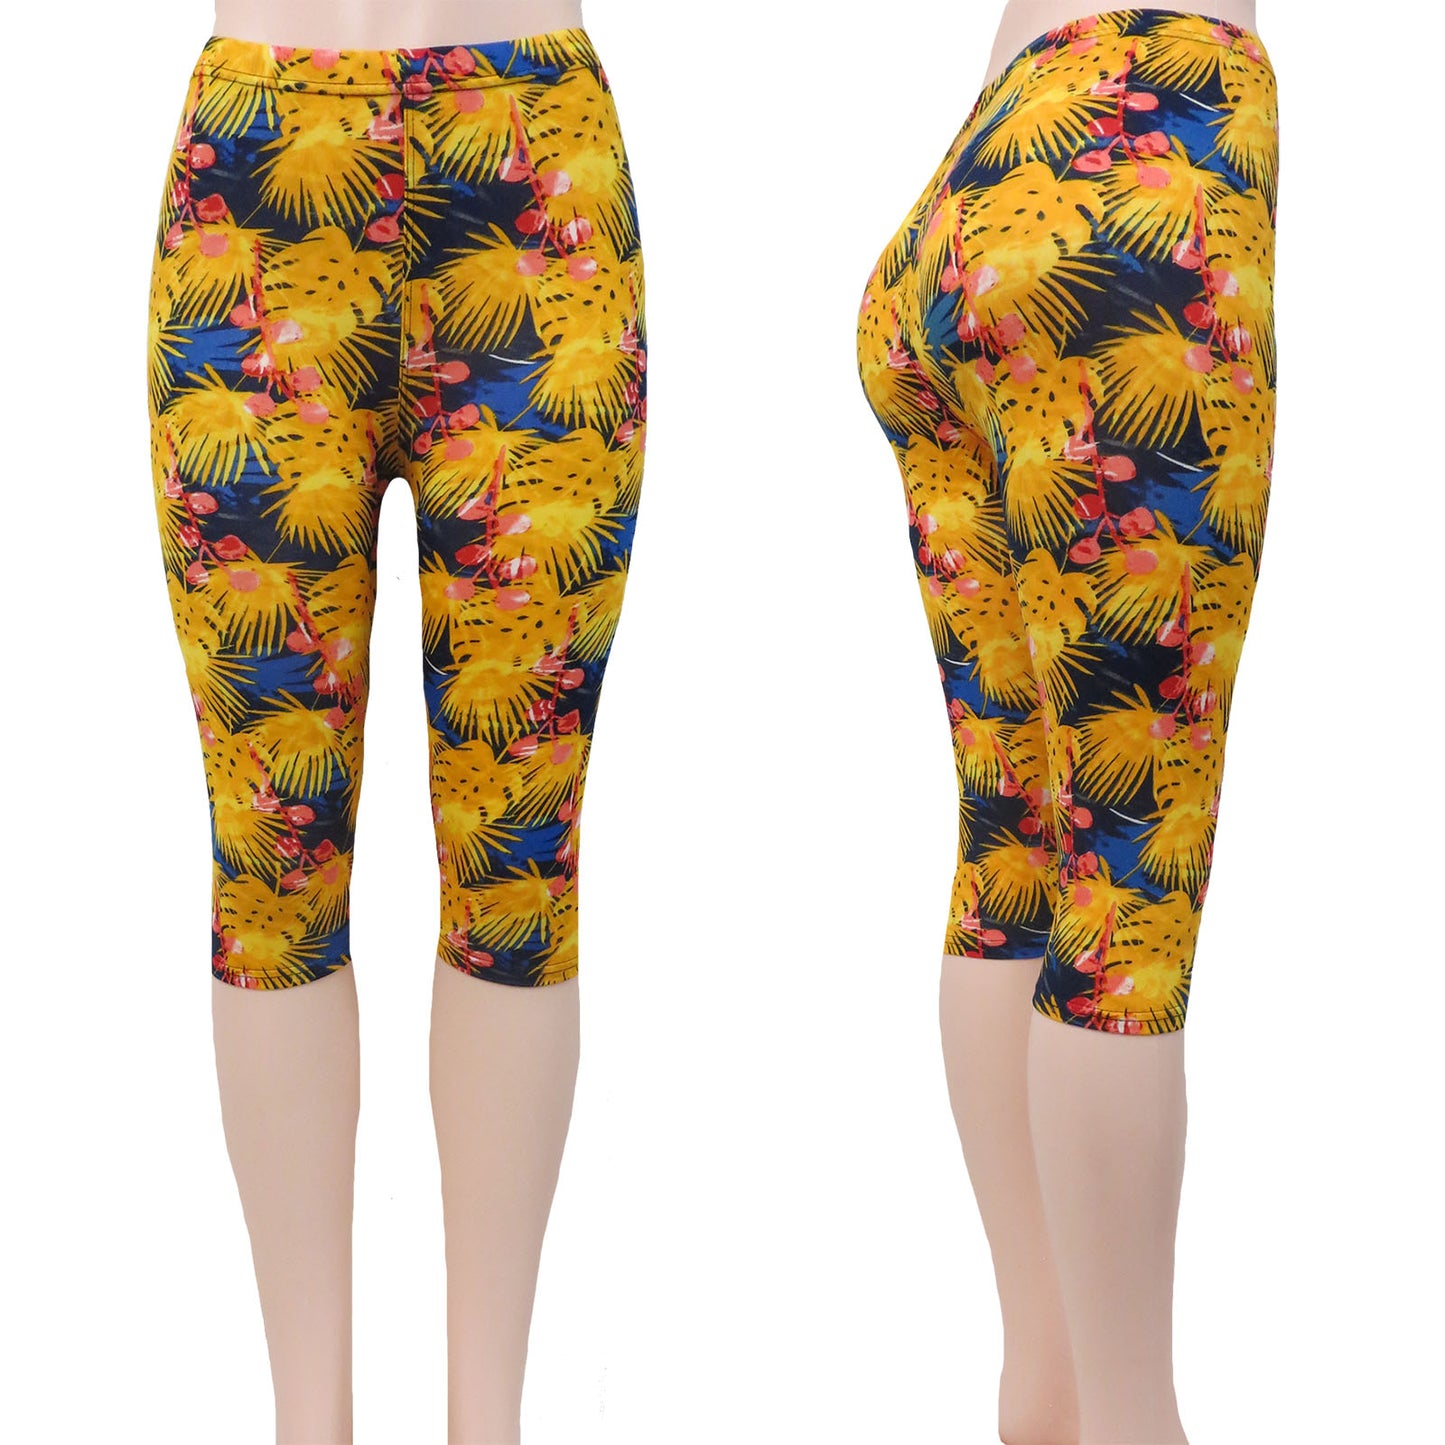 ITEM NUMBER: AP730-CHARLIZE (12 PIECE PACK WAS $2.75 - CLEARANCE SALE JUST $1.50 / PIECE) MULTICOLOR PATTERNED CAPRI LEGGINGS